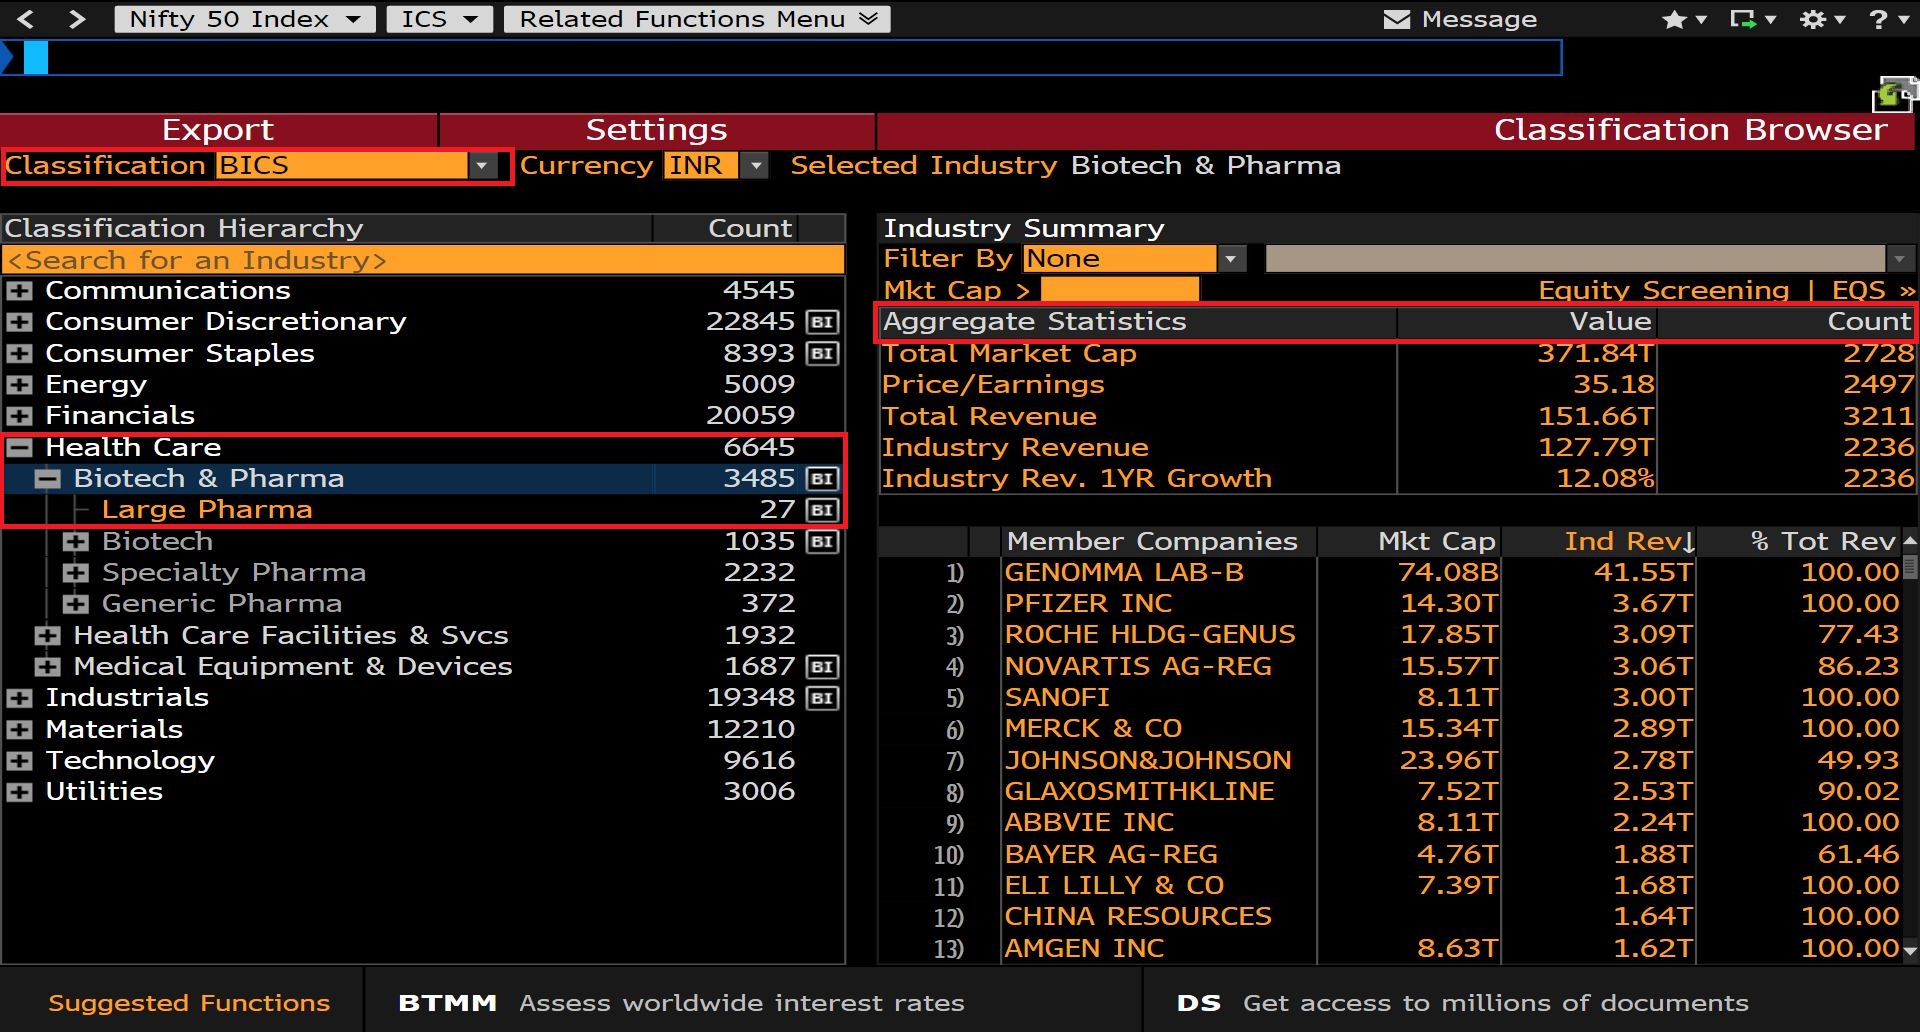 Login to Bloomberg (Available in Library) then Search for BICS and Select Health Care and Click Biotech & Pharma